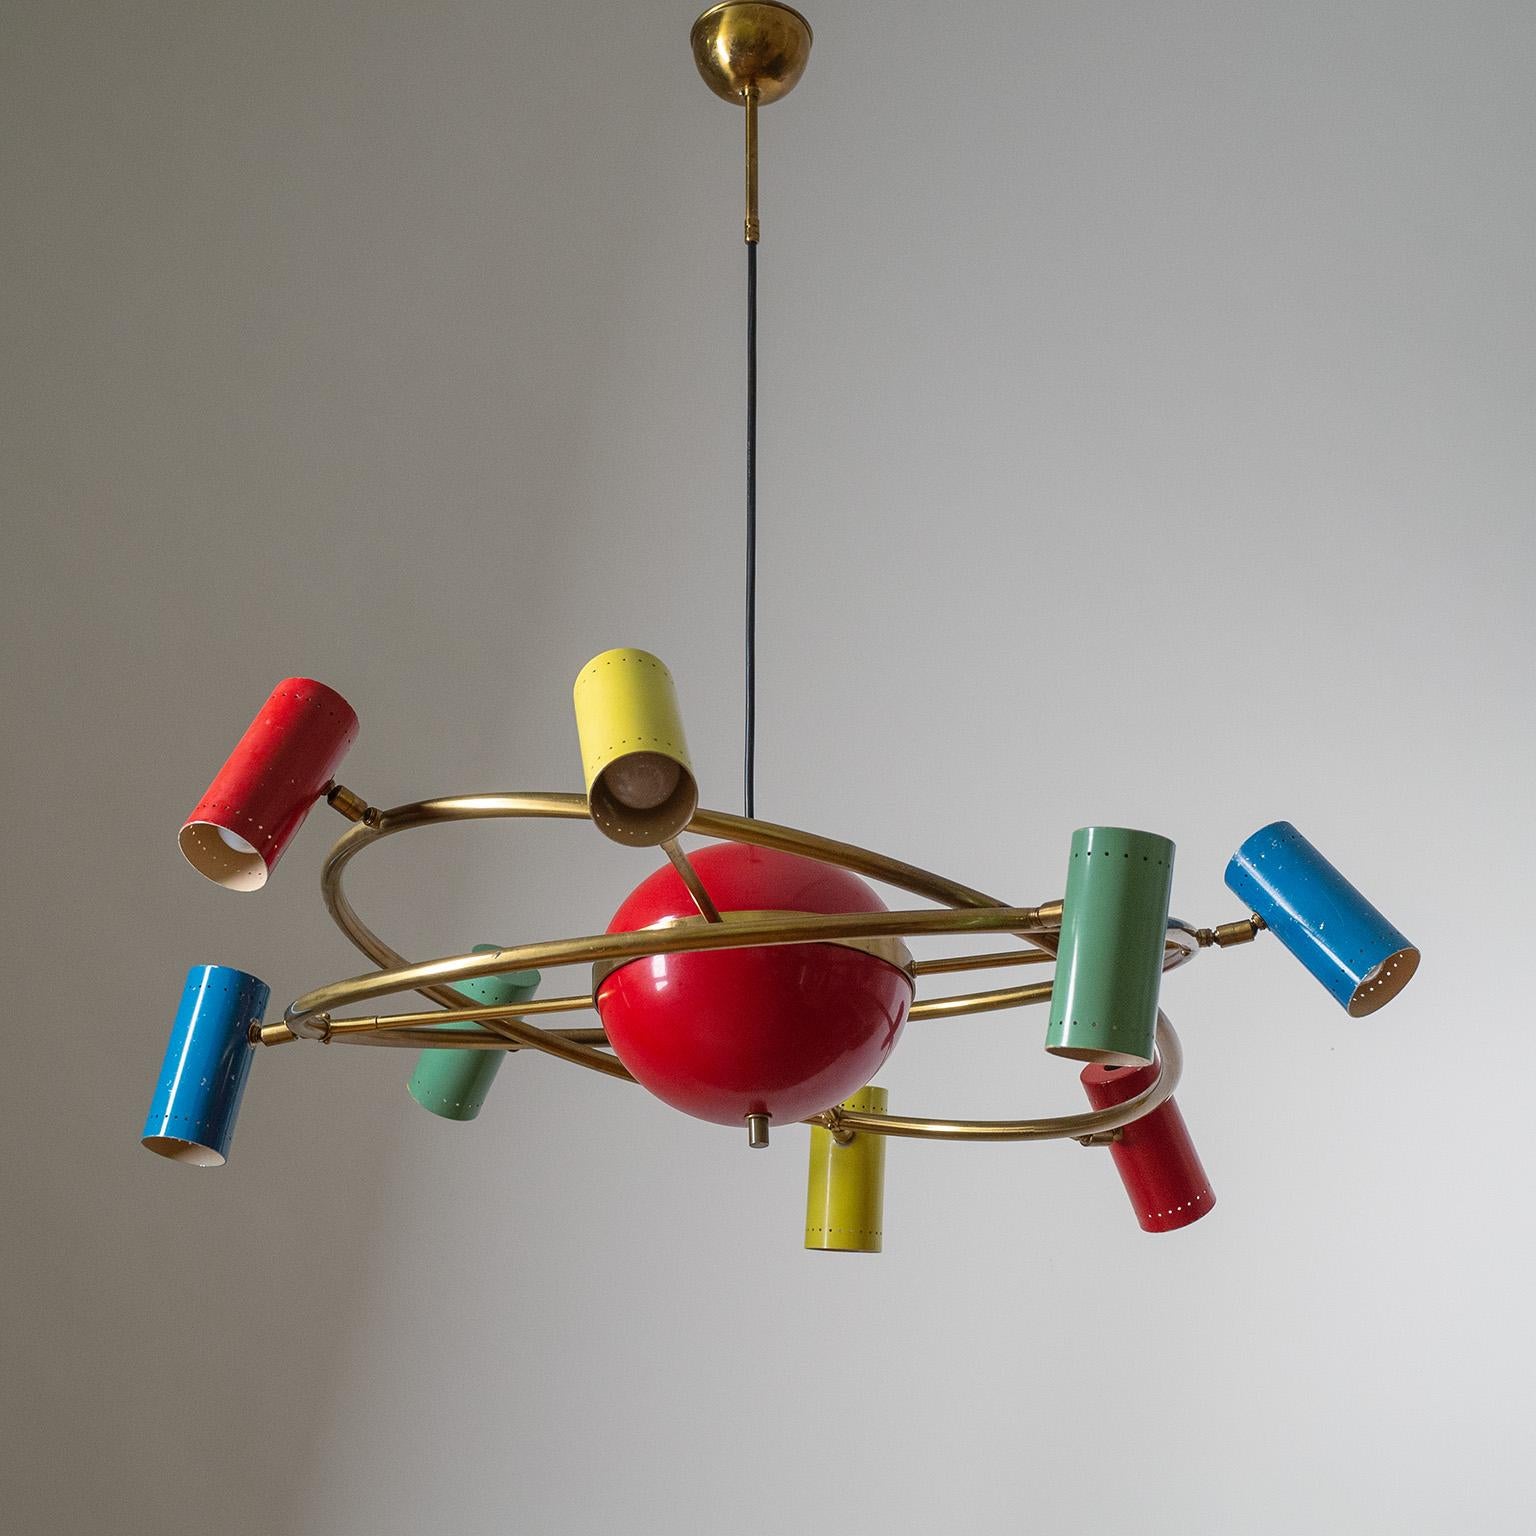 Rare Stilnovo Sputnik chandelier, circa 1960. Two large interlocked brass rings with eight lacquered cones 'orbiting' a large central globe. The colorful cones are attached by double-joints, allowing them to be positioned in multiple different ways,